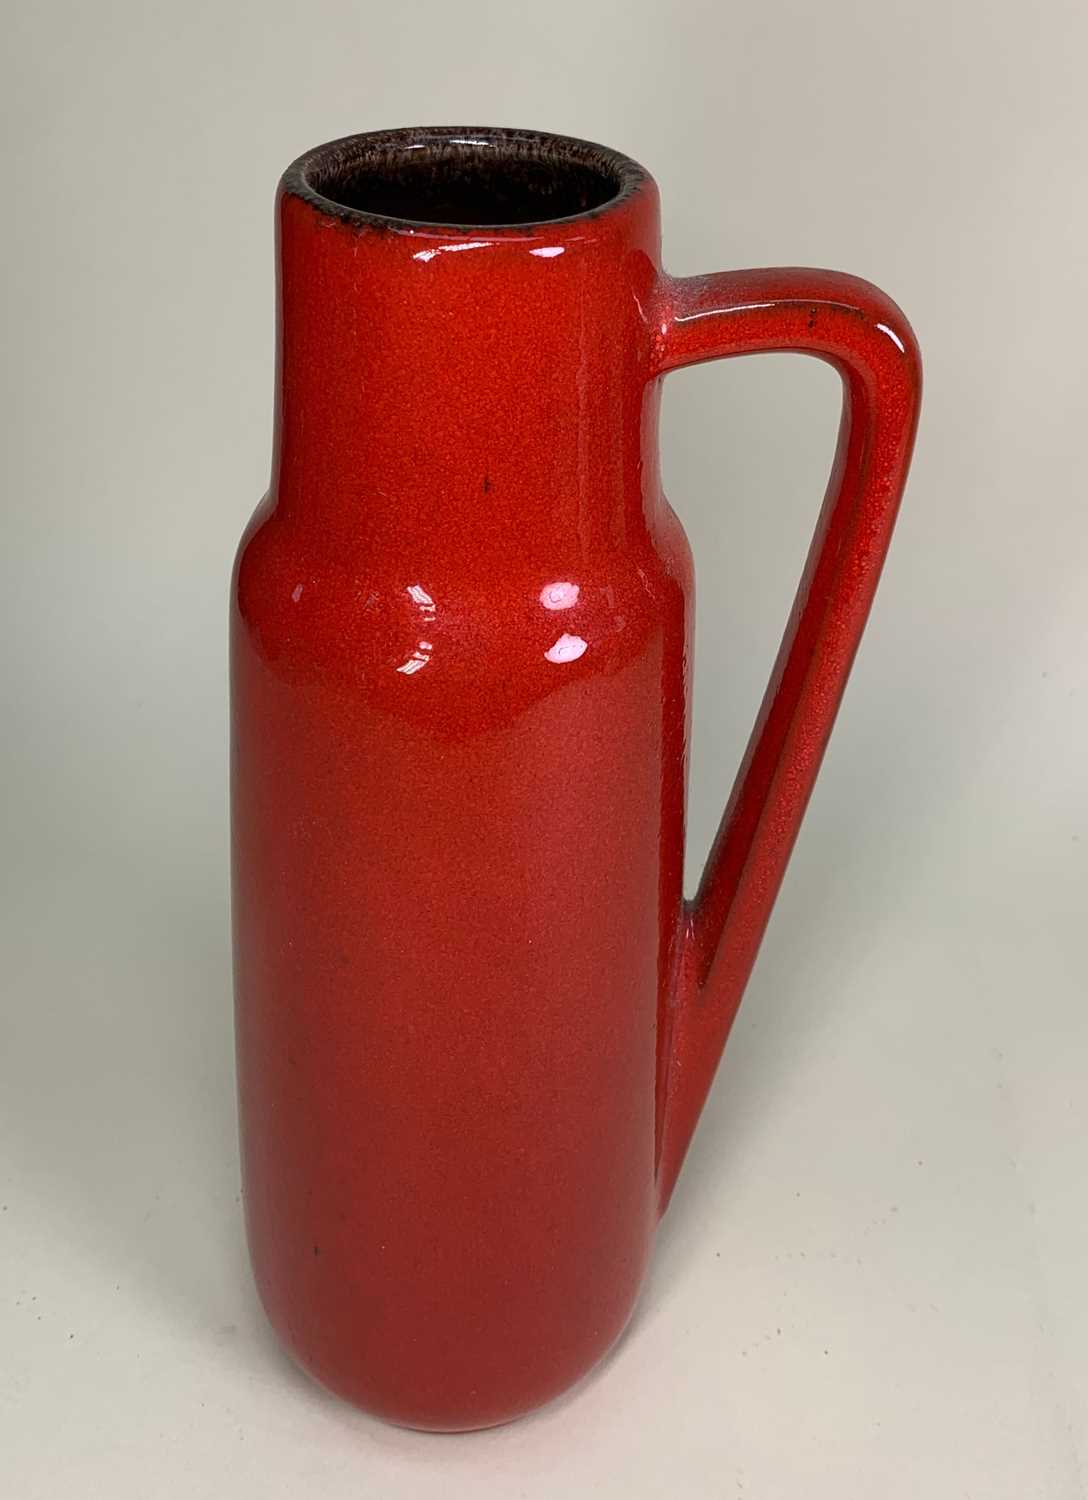 MID CENTURY POTTERY WGP KERAMICS COLLECTION including one Scheurich 275-28 solid red glazed vase - Image 9 of 20